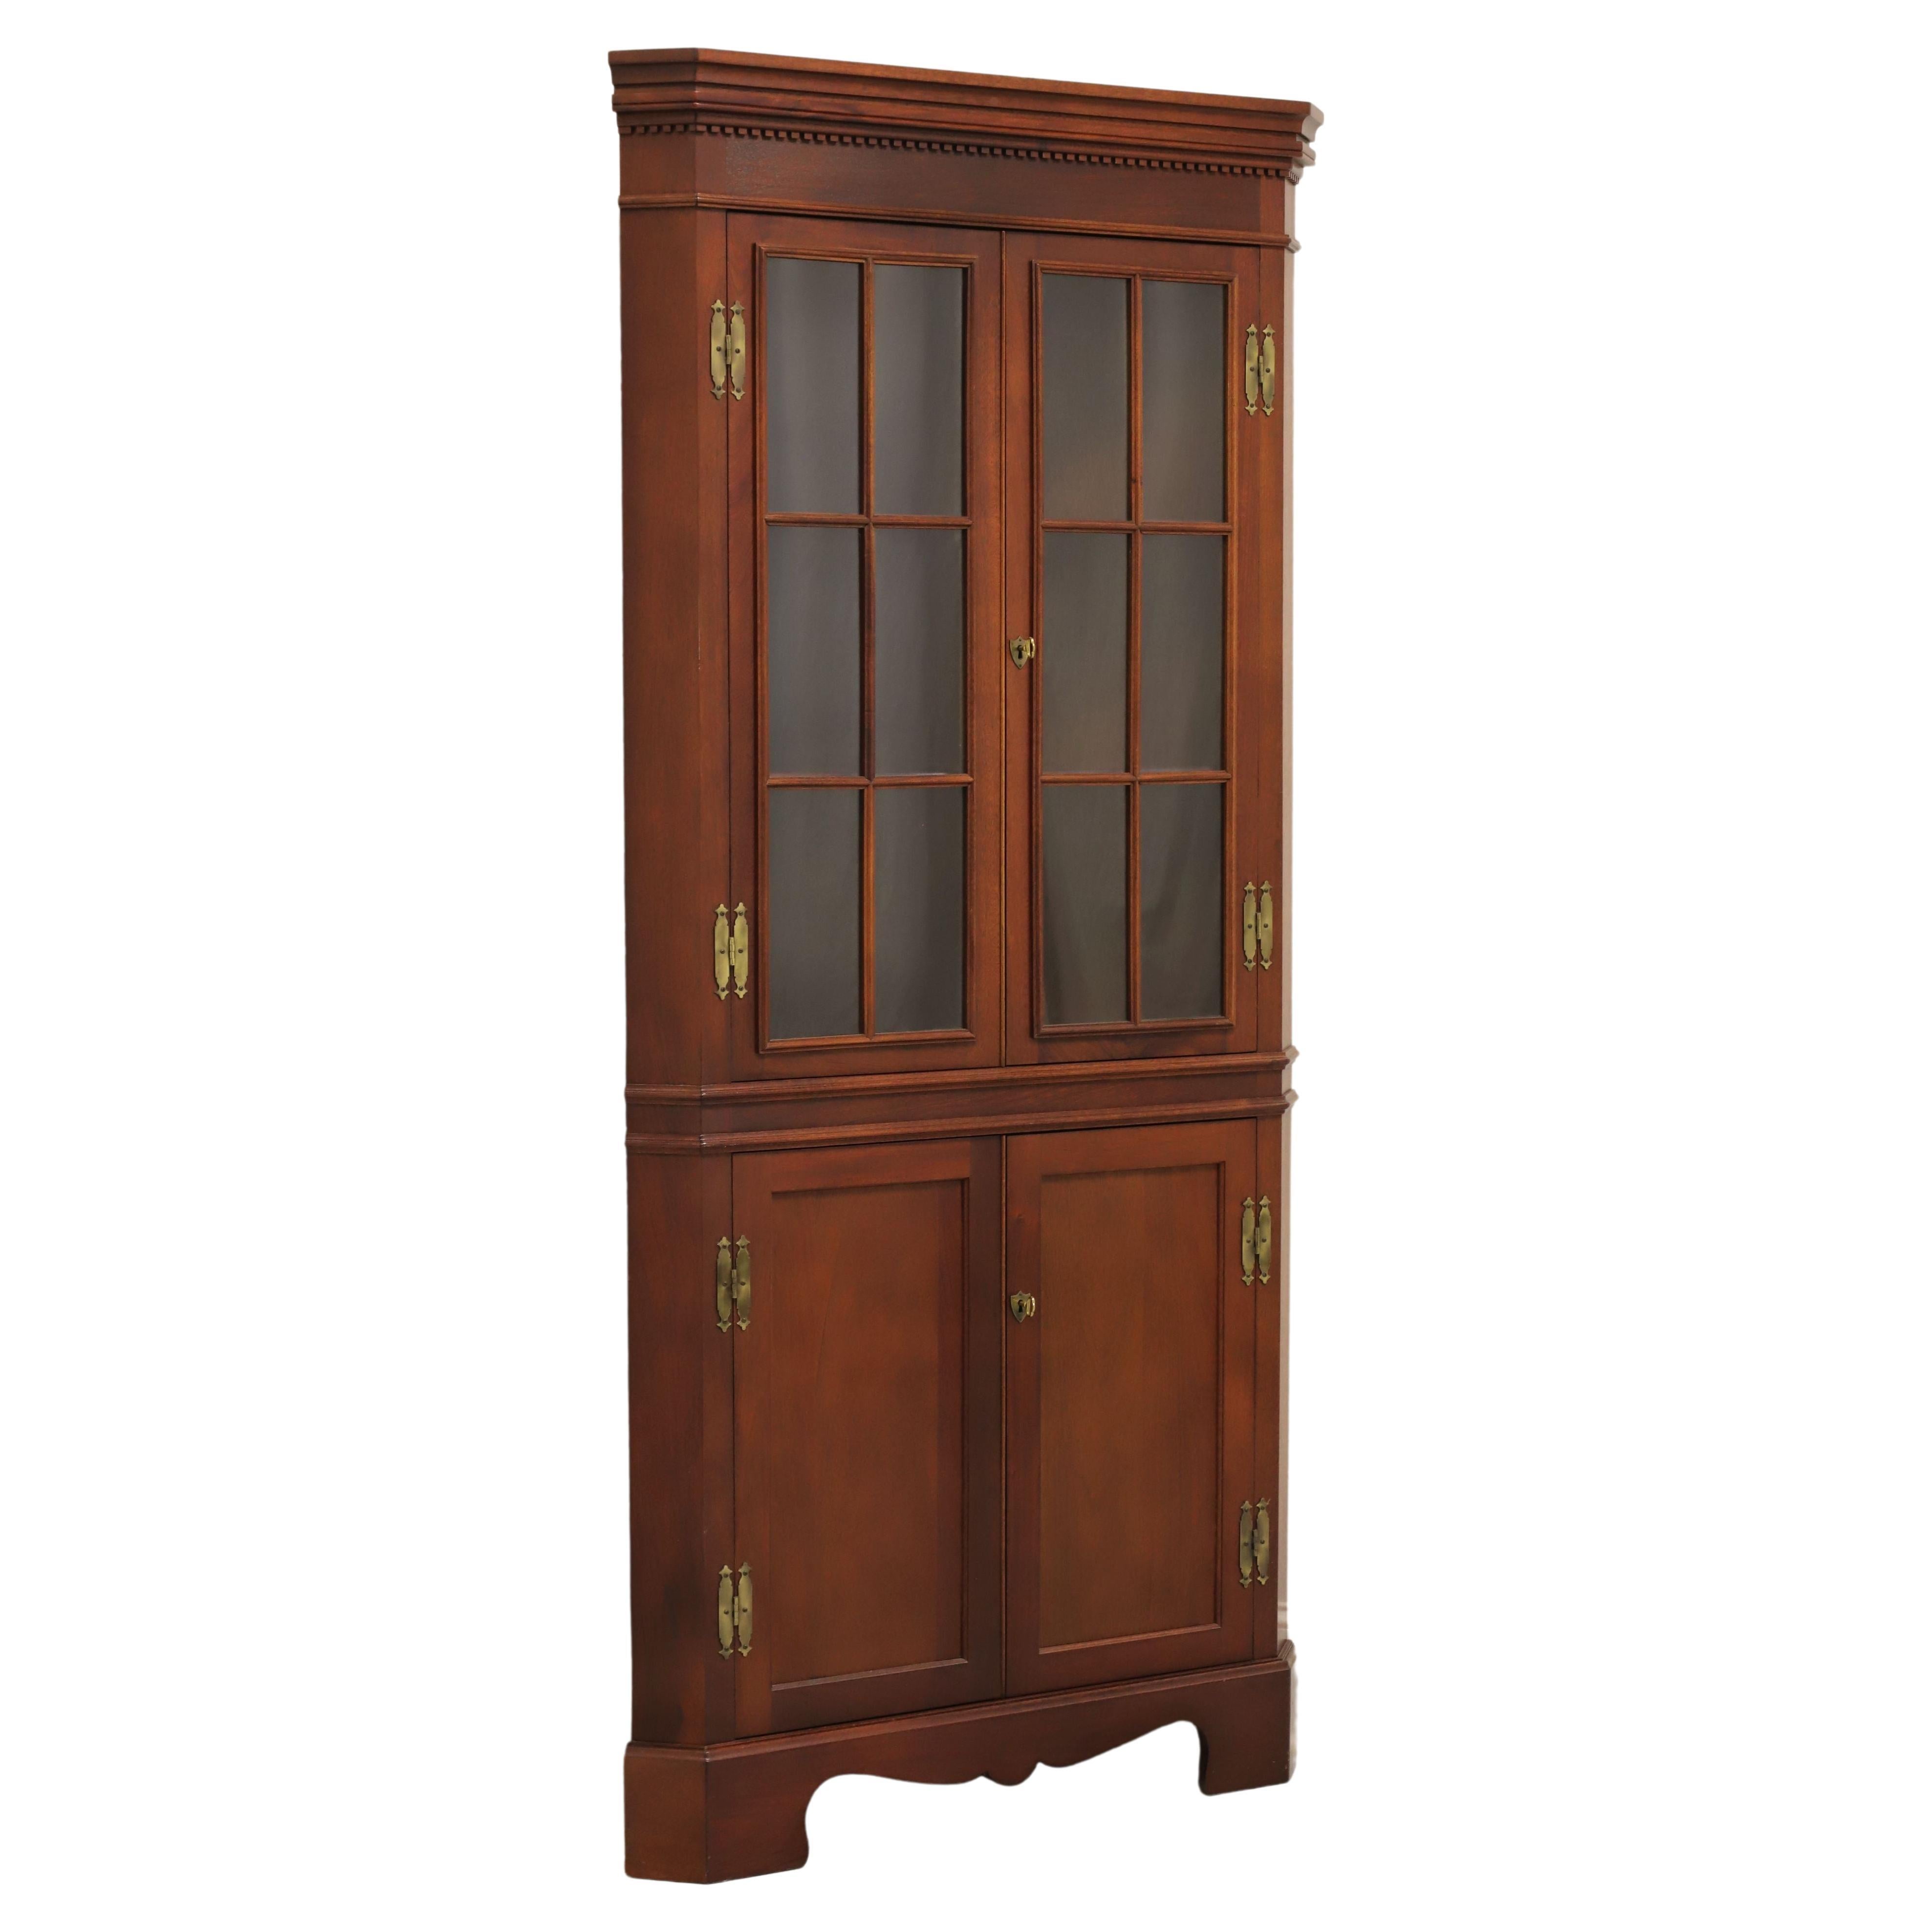 CRAFTIQUE Solid Mahogany Chippendale Style Corner Cupboard / Cabinet - C For Sale